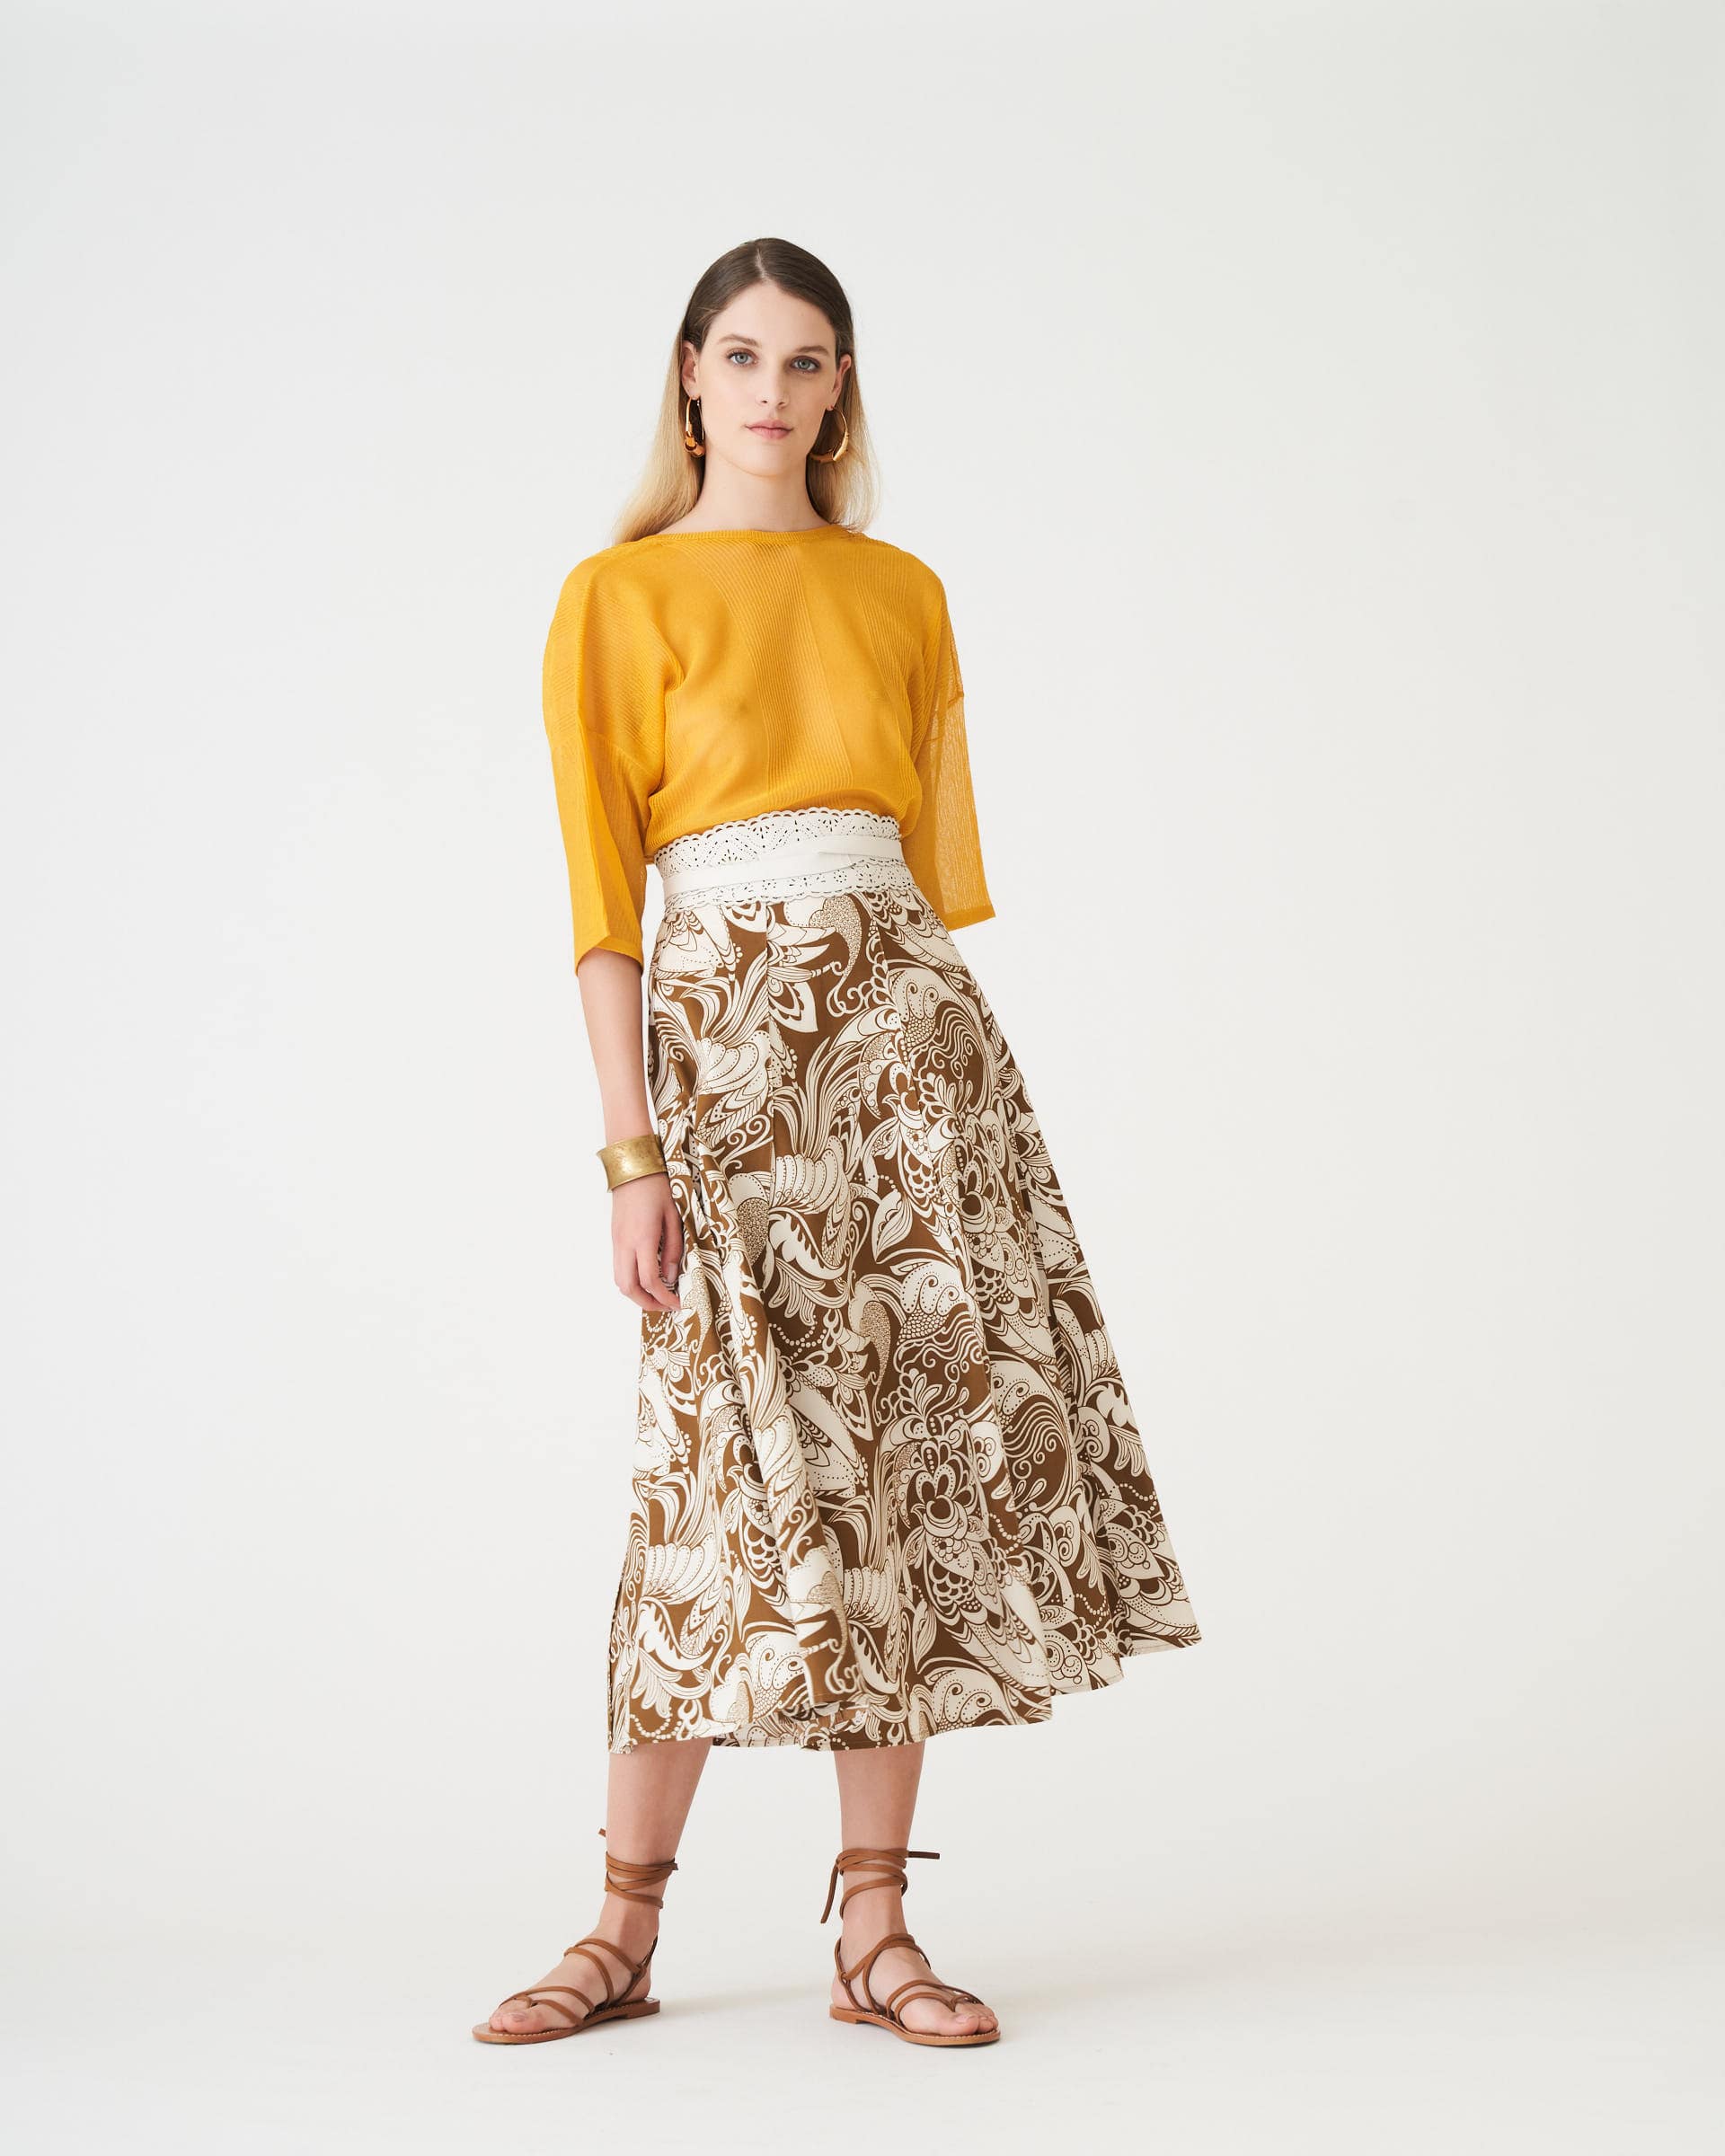 The Market Store | Patterned Towel Skirt